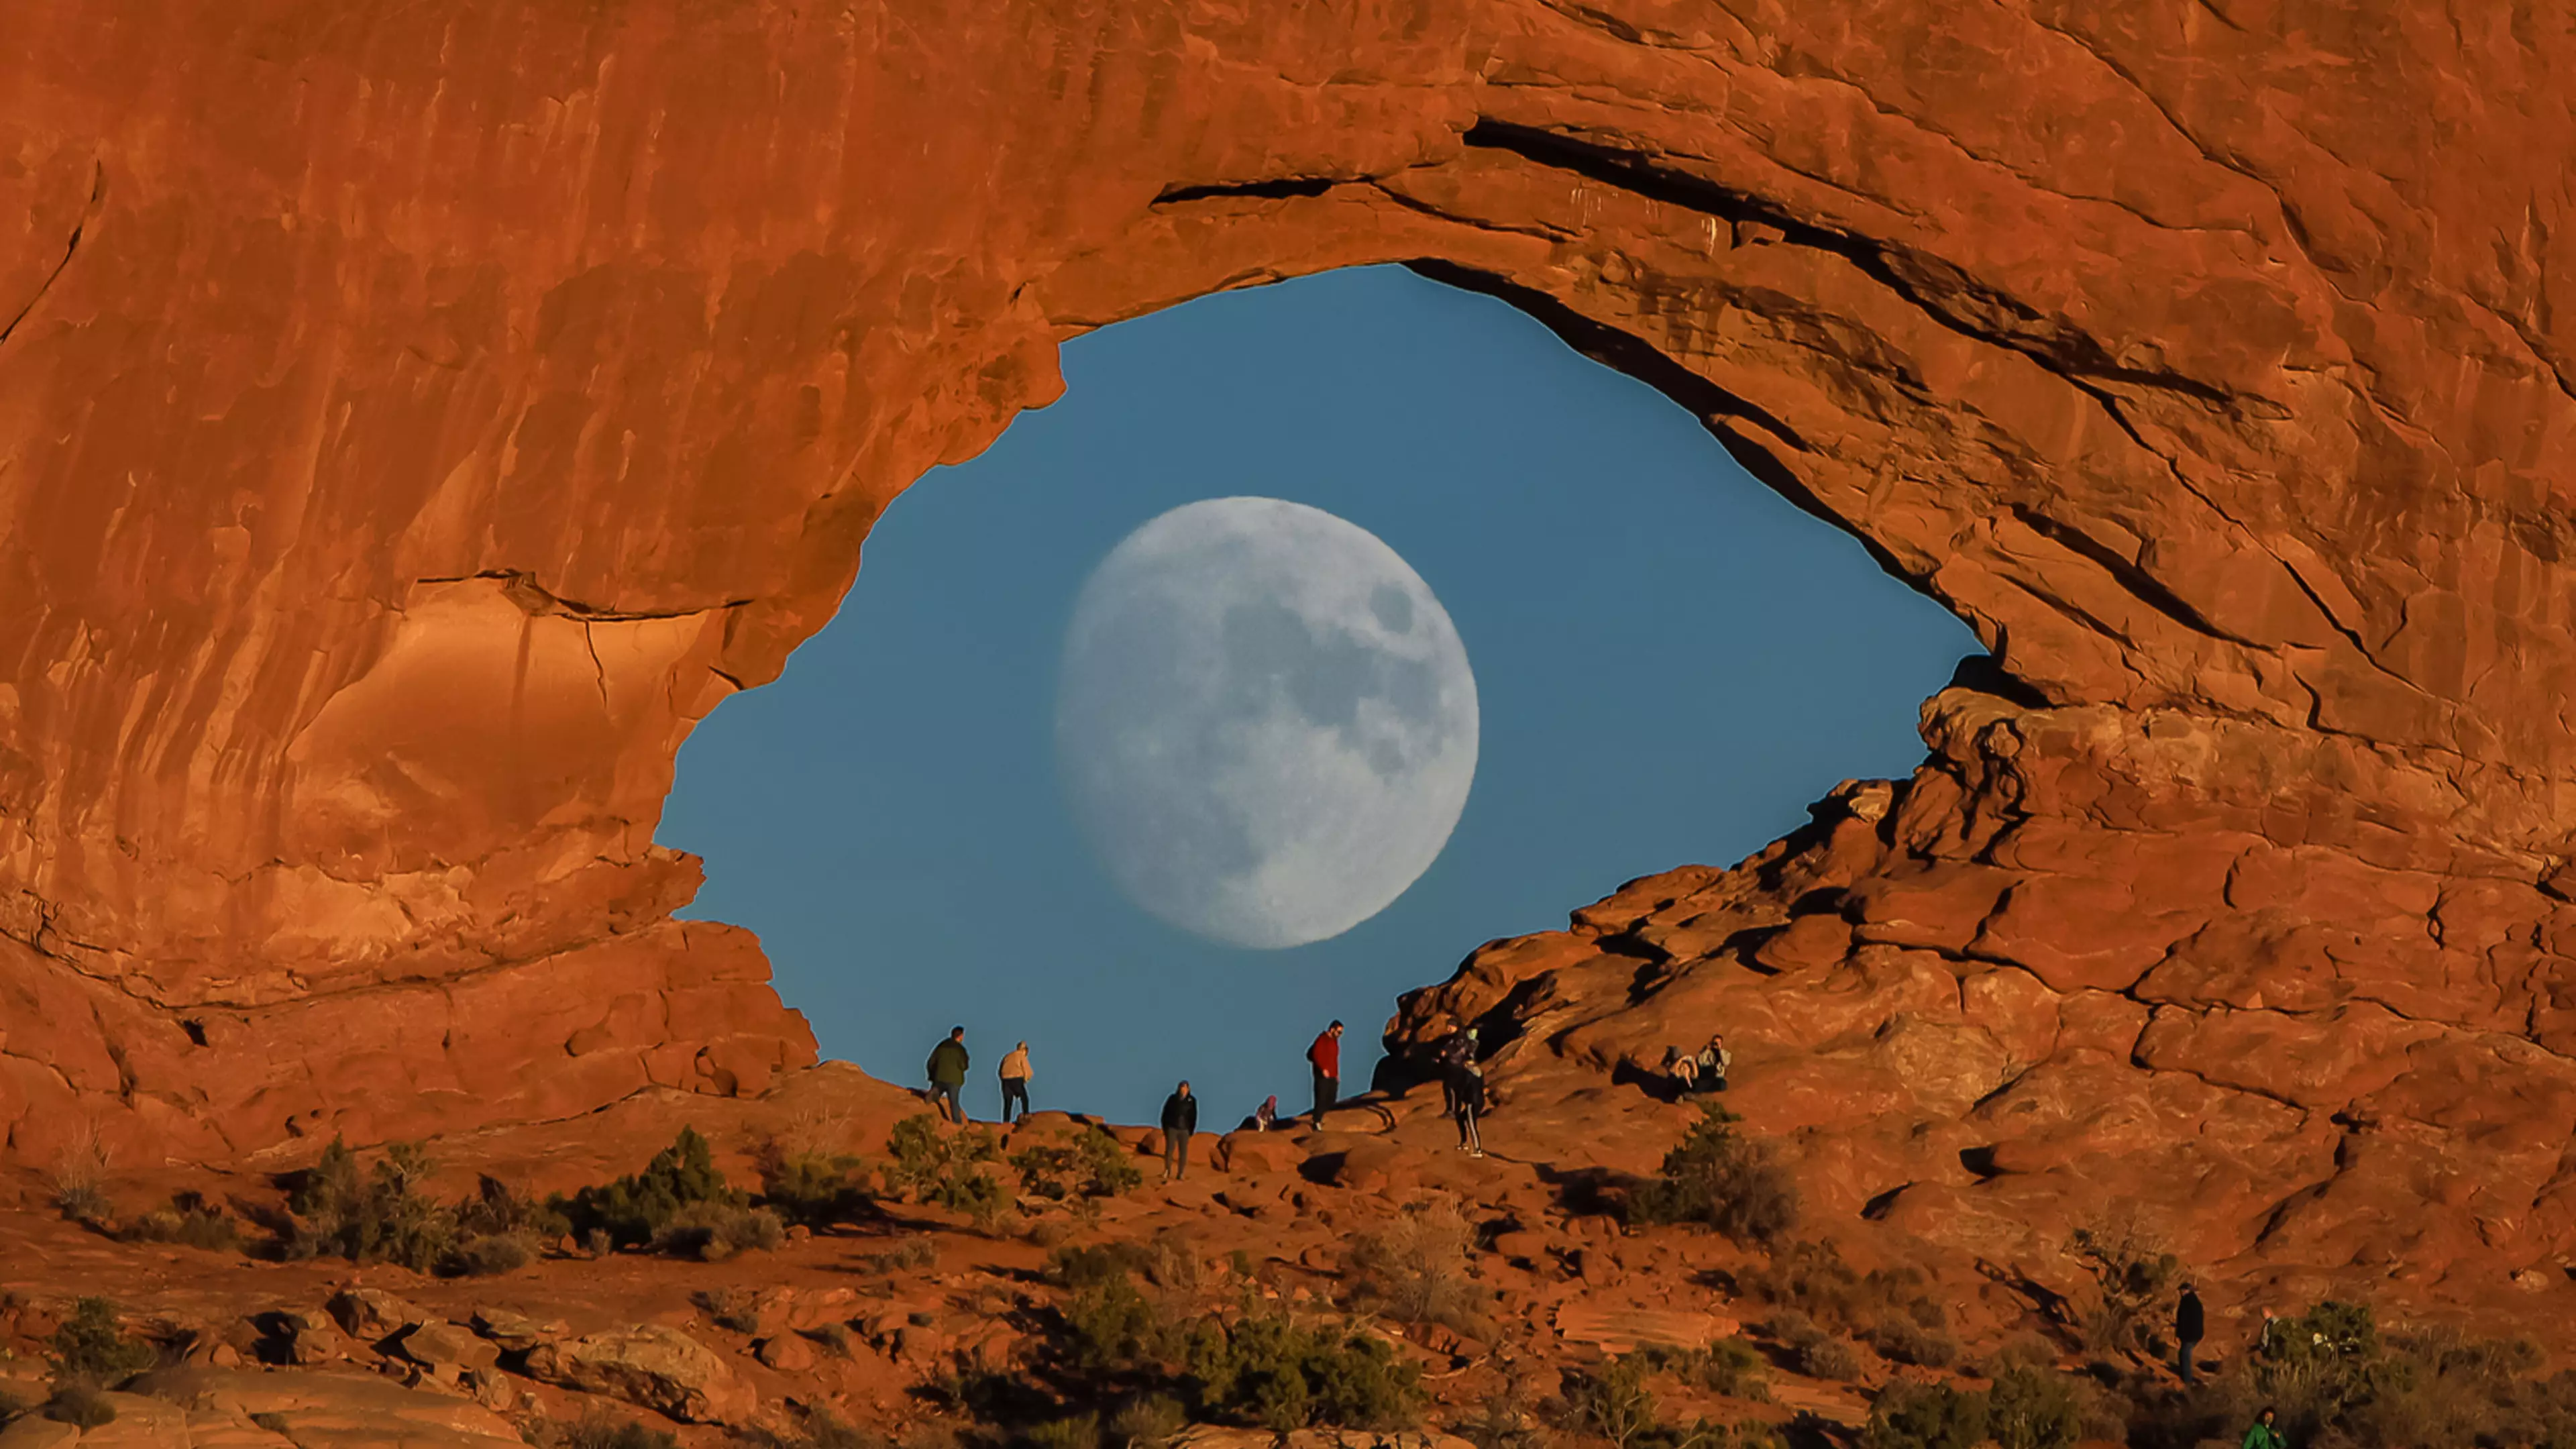 Full Moon Looks Like Giant Eye In Stunning Rock Arch Photograph 